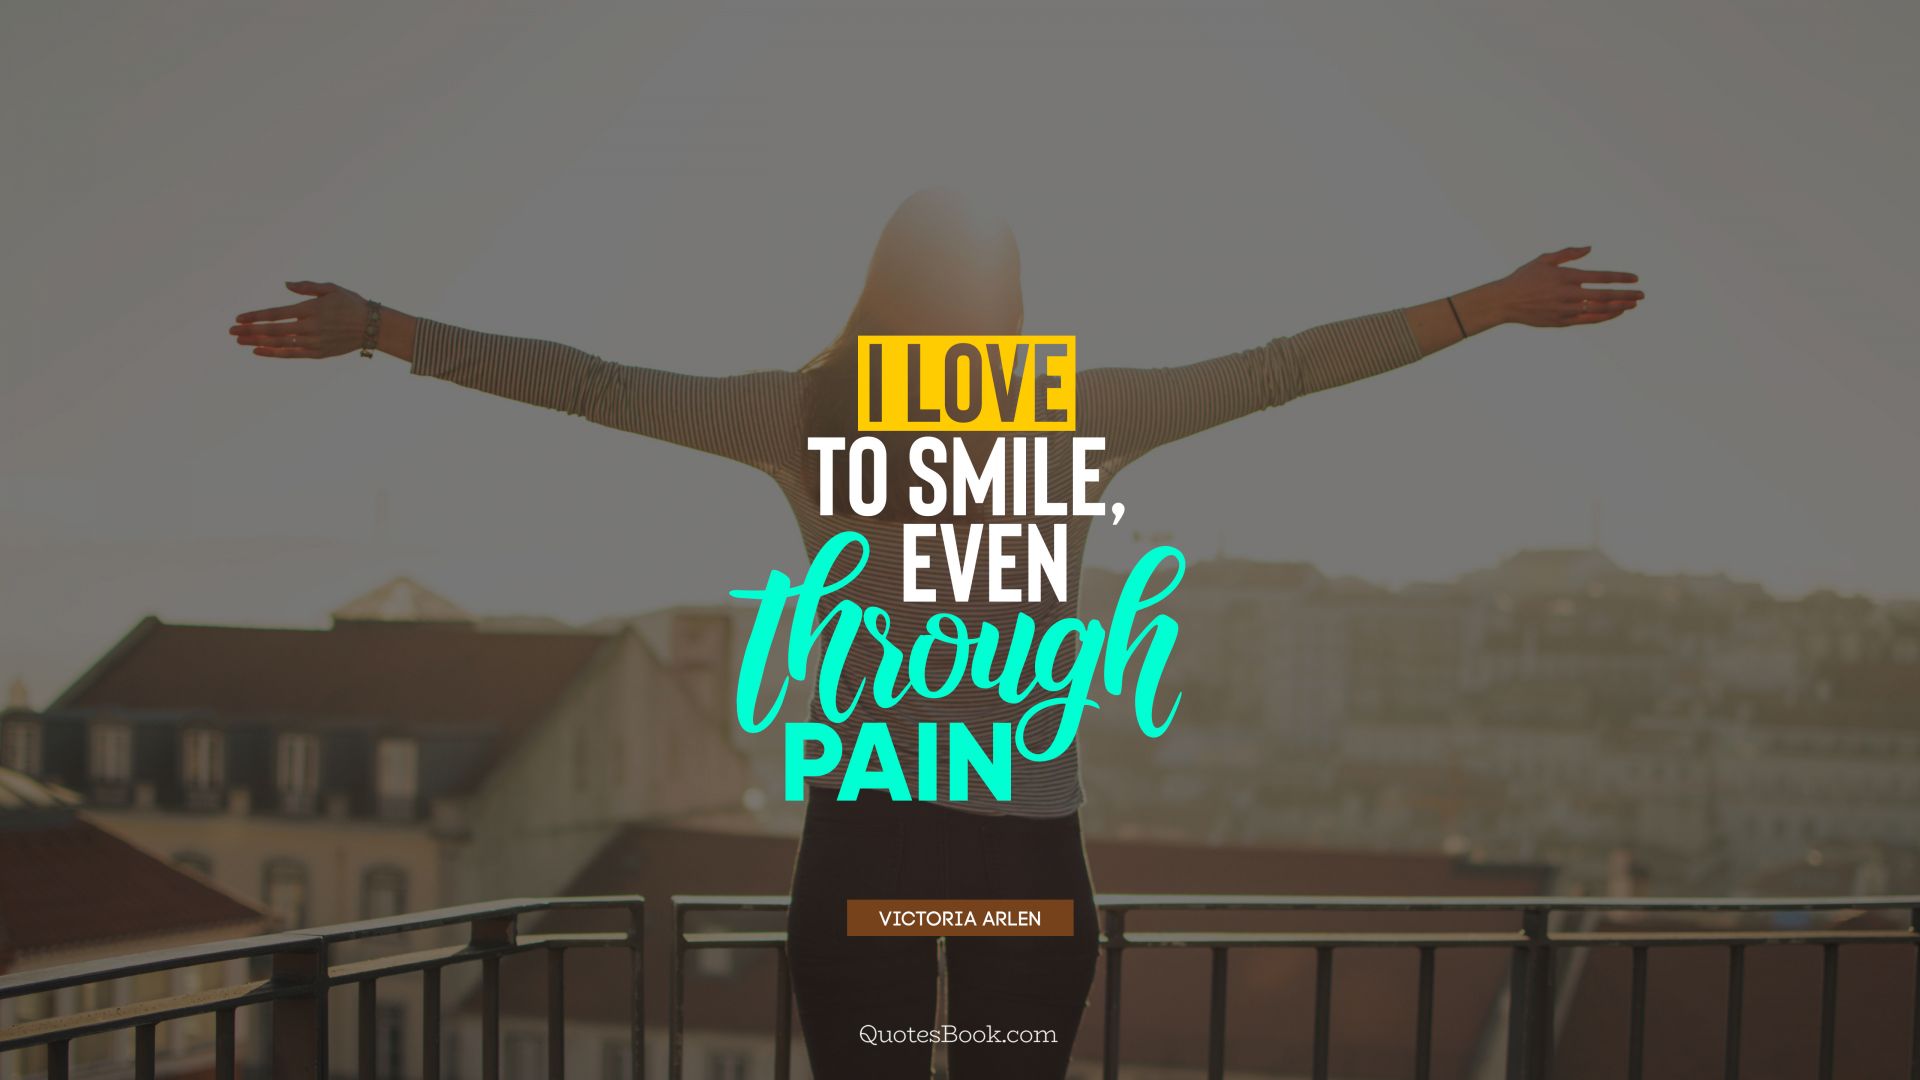 I love to smile, even through pain. - Quote by Victoria Arlen